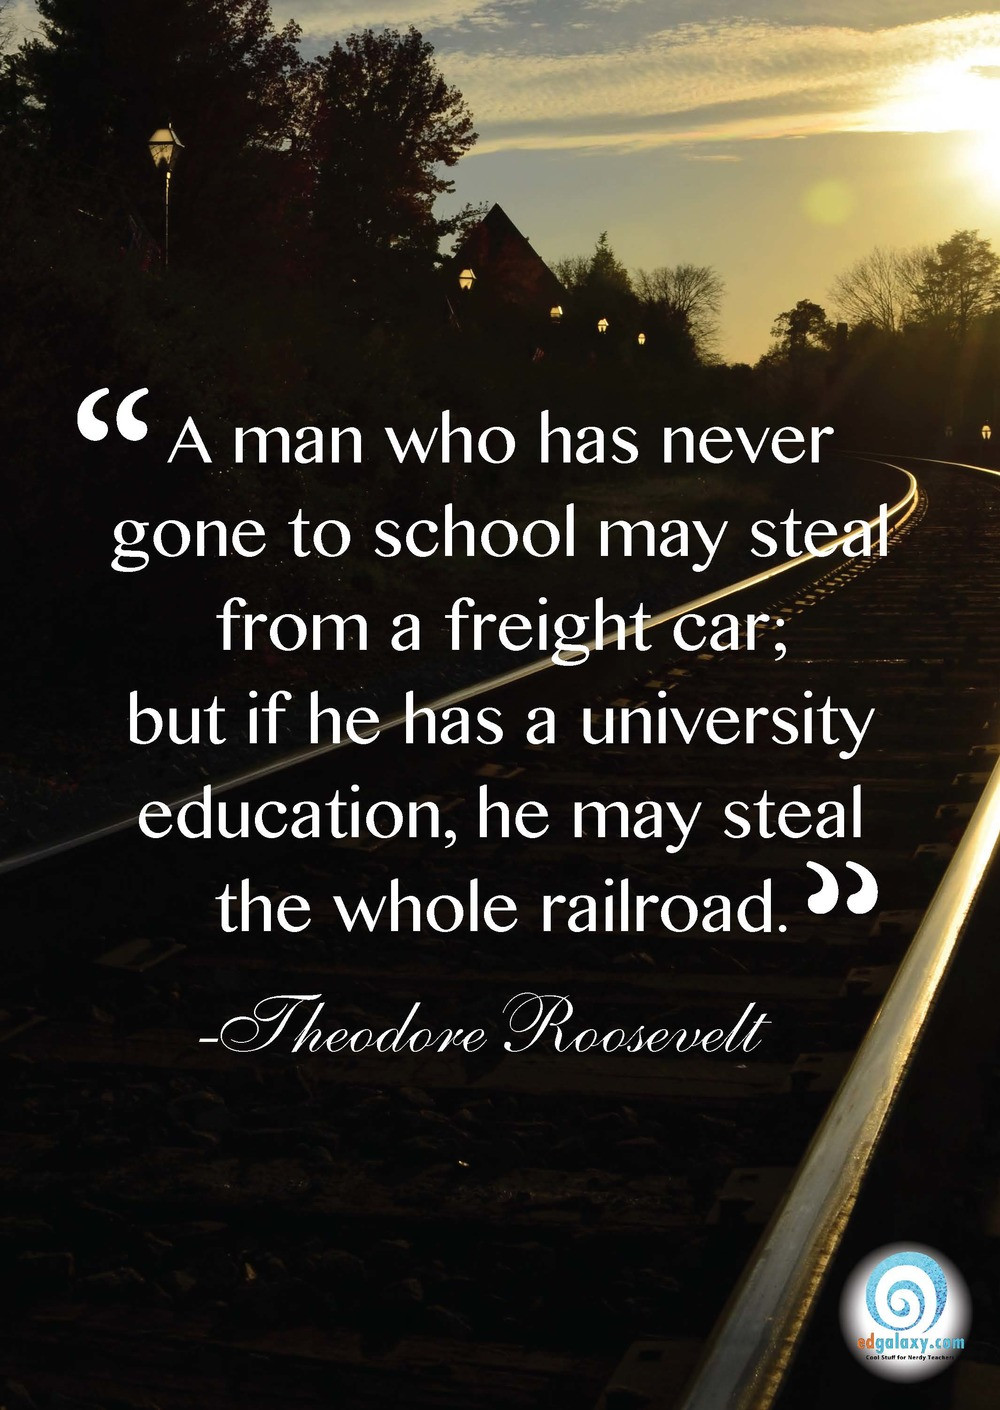 Inspirational Quotes On Education
 Education Quotes Inspirational QuotesGram